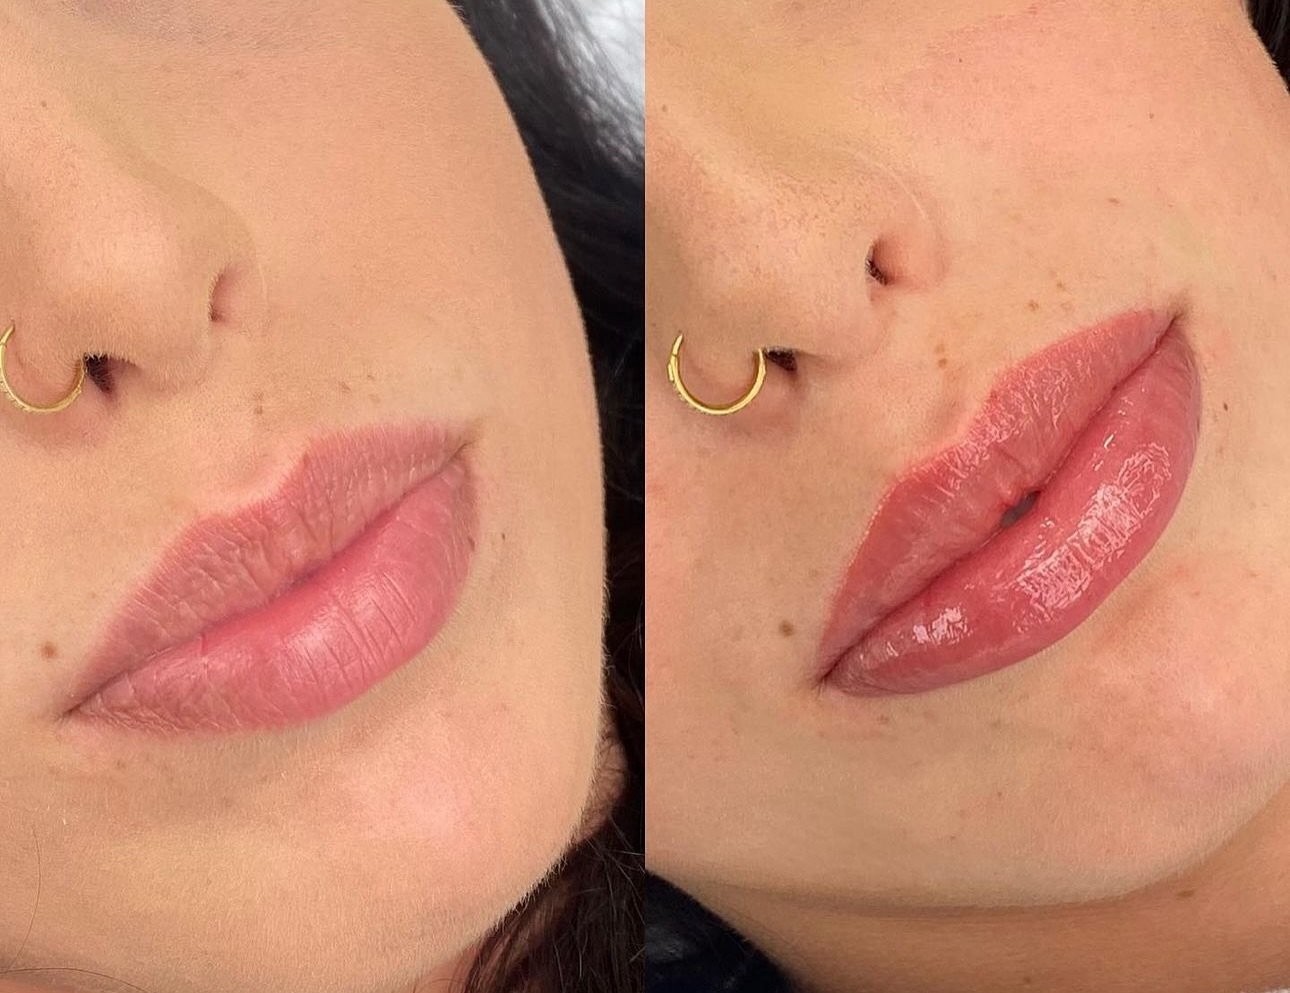 Take advantage of our promotional offer with our exceptional semi permanent makeup artist Faye. Enhance your lips with our natural lip blush technique